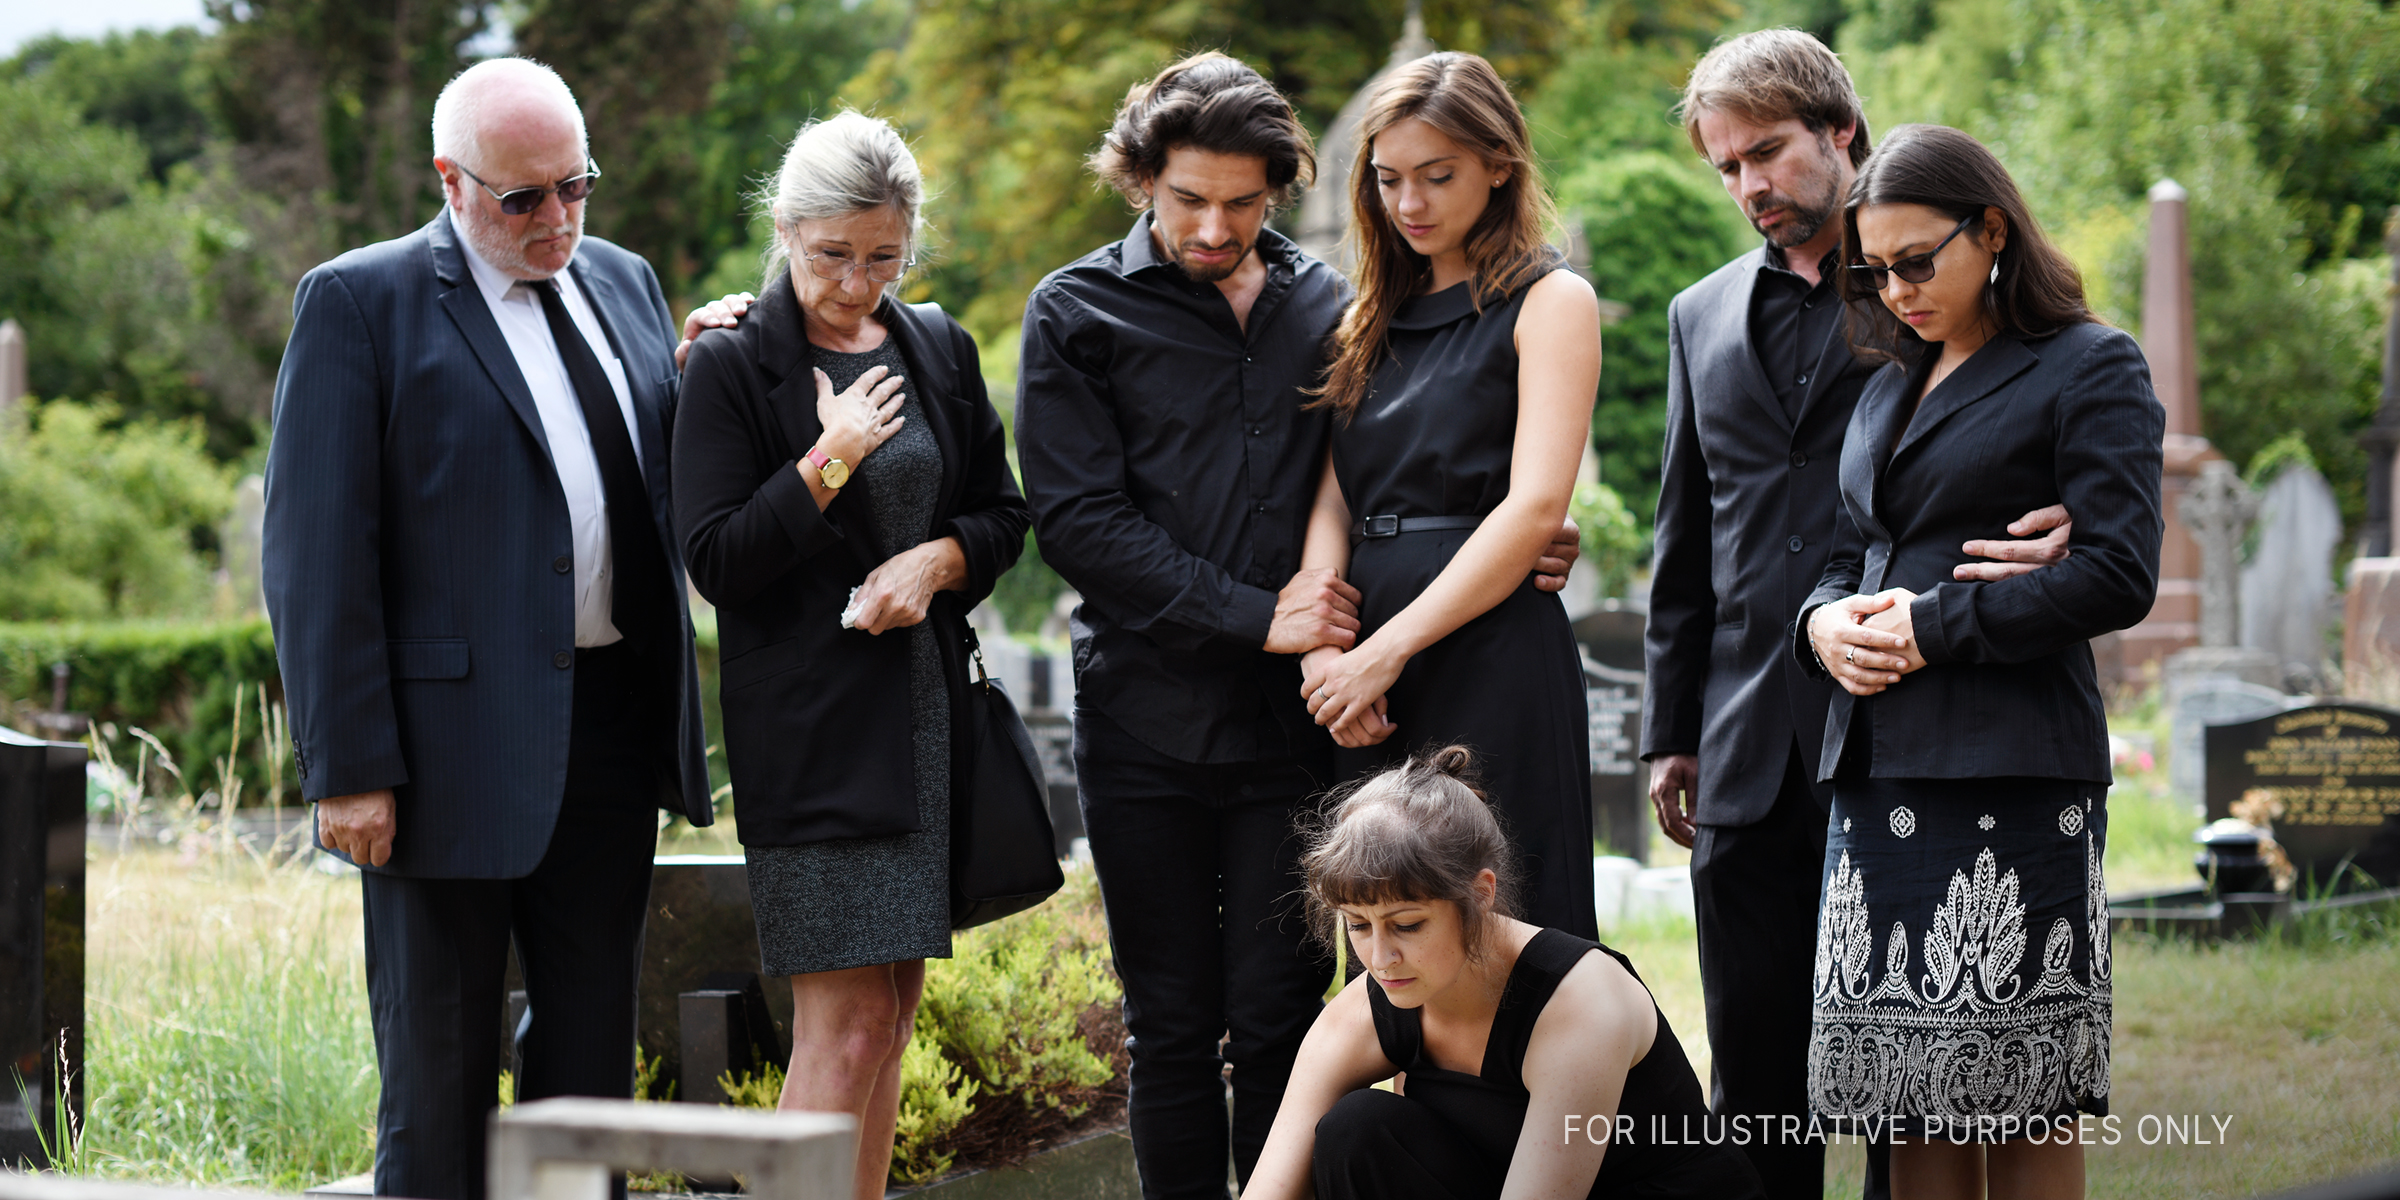 Family at cemetery | Source: Shutterstock